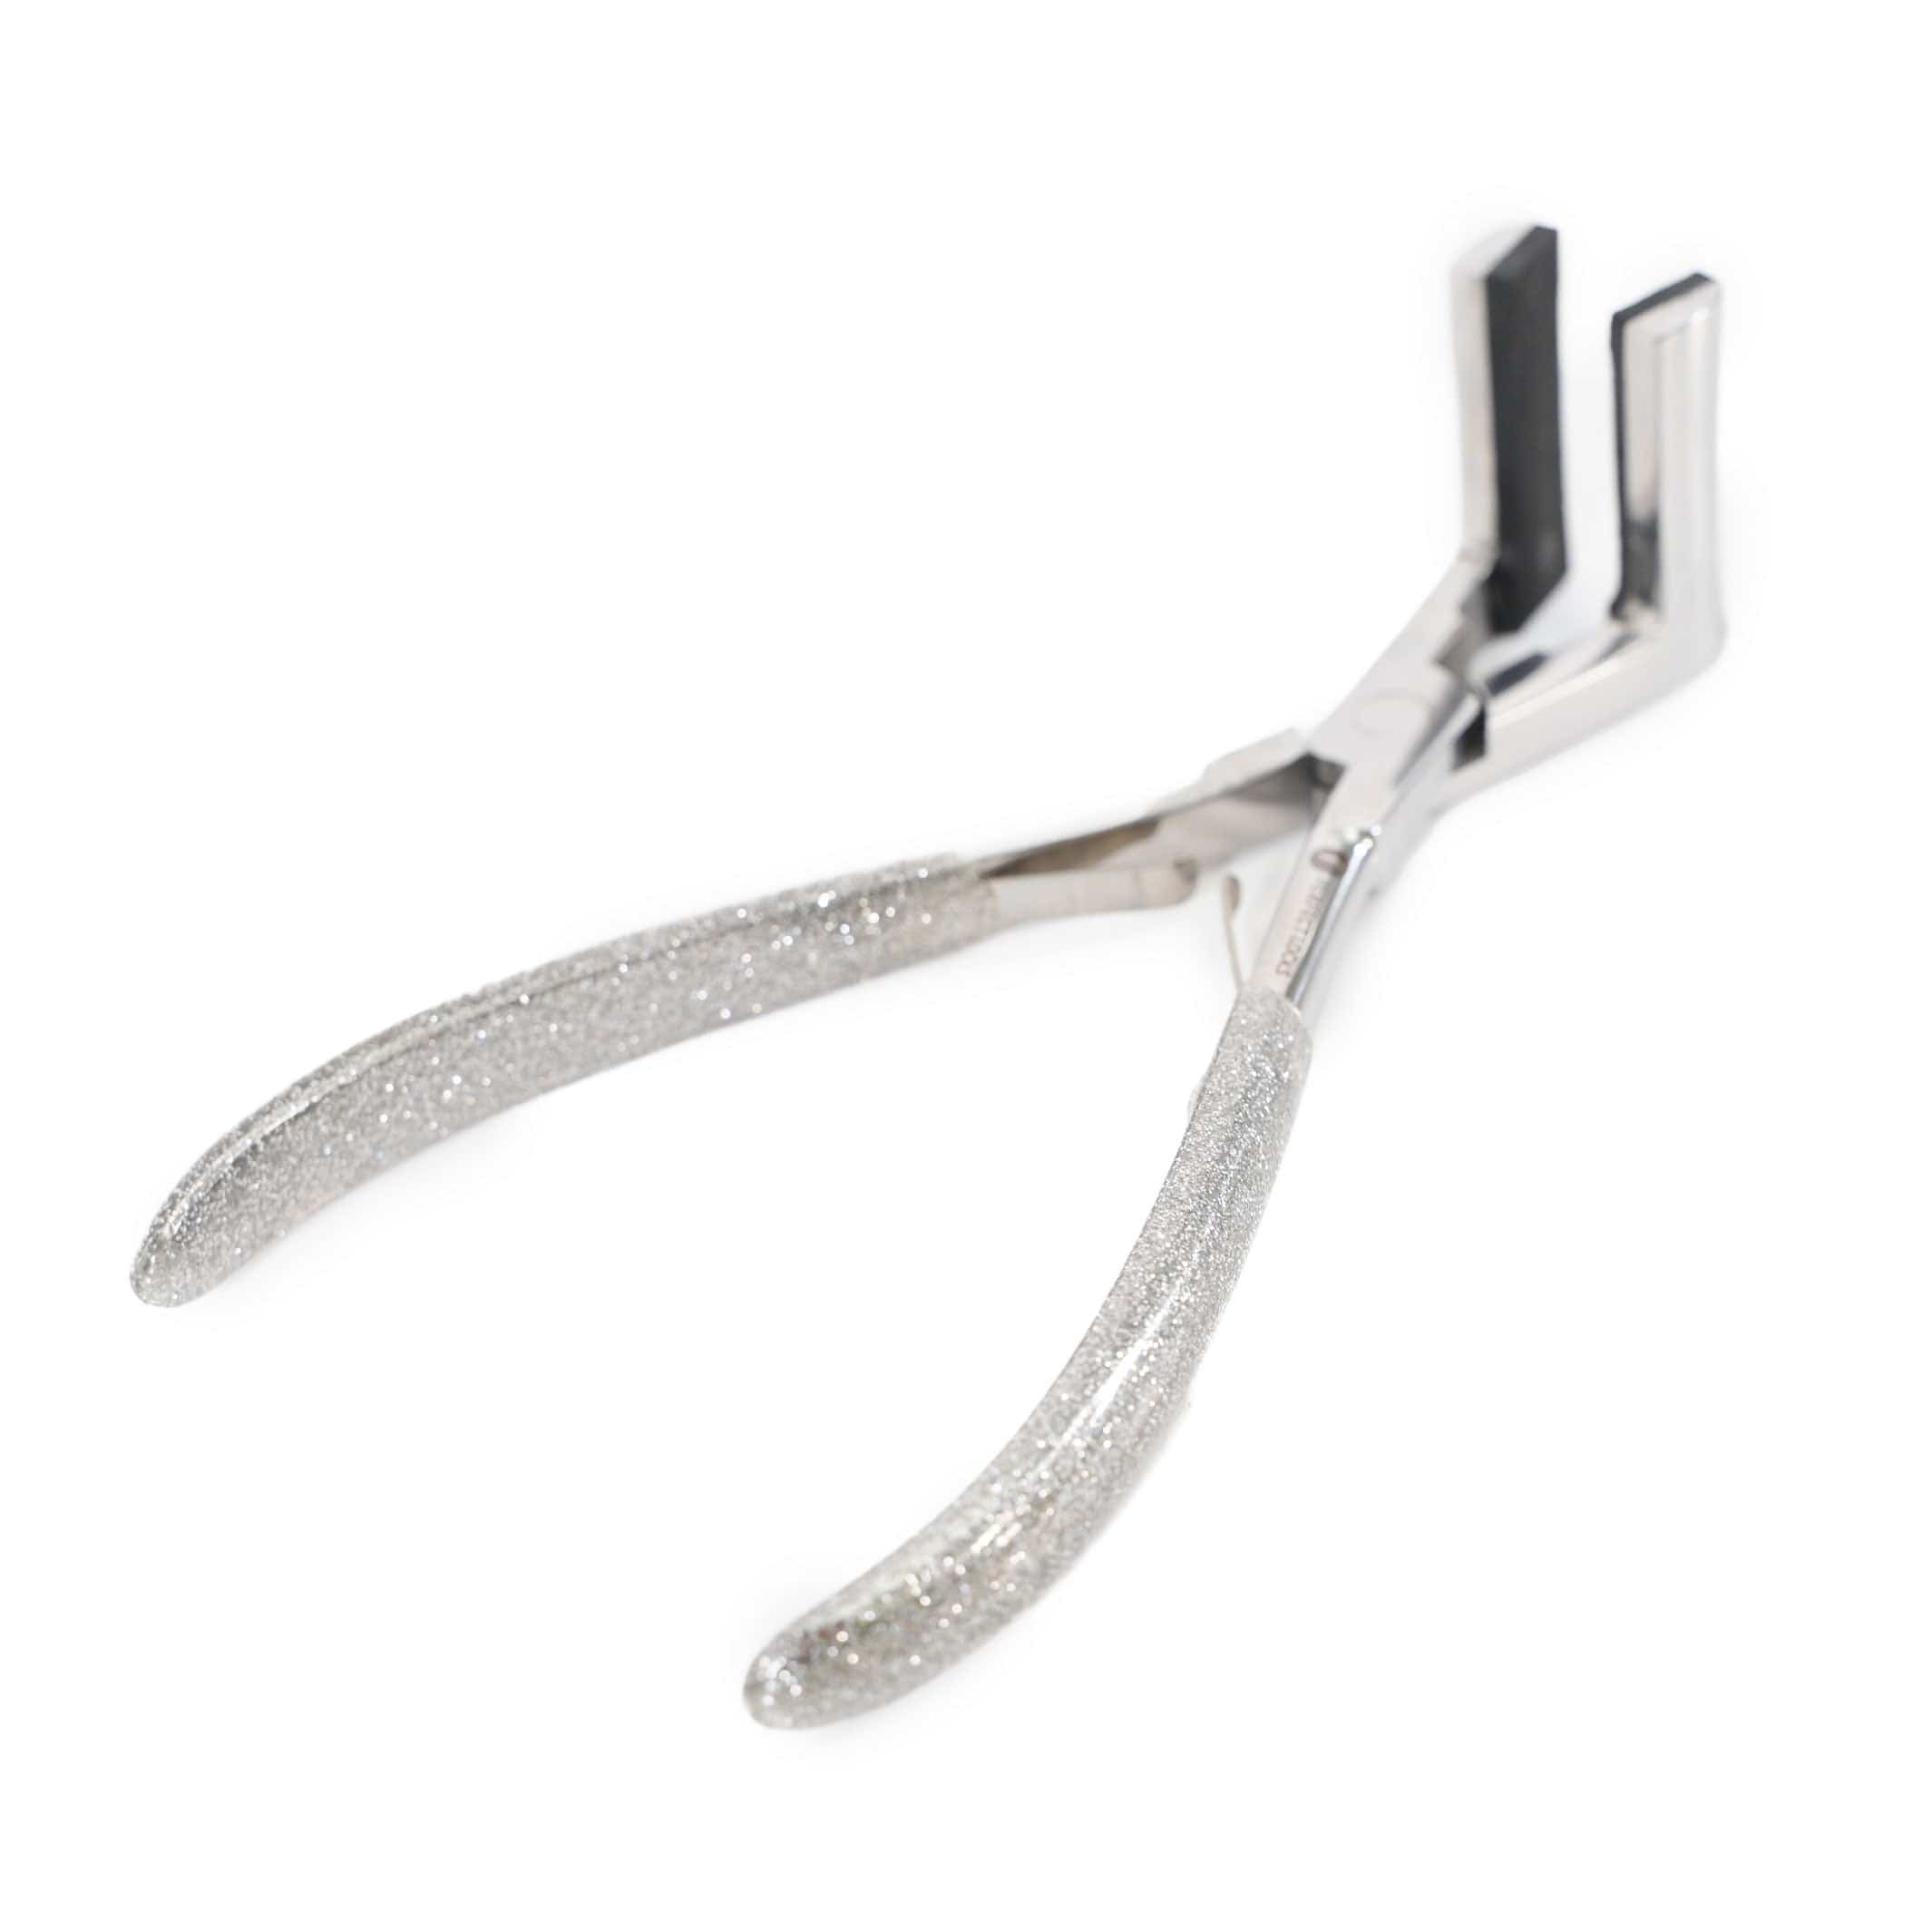 Tape in Hair Extensions Pliers Stainless Steel Extension Plier Tape Sealing  Tool